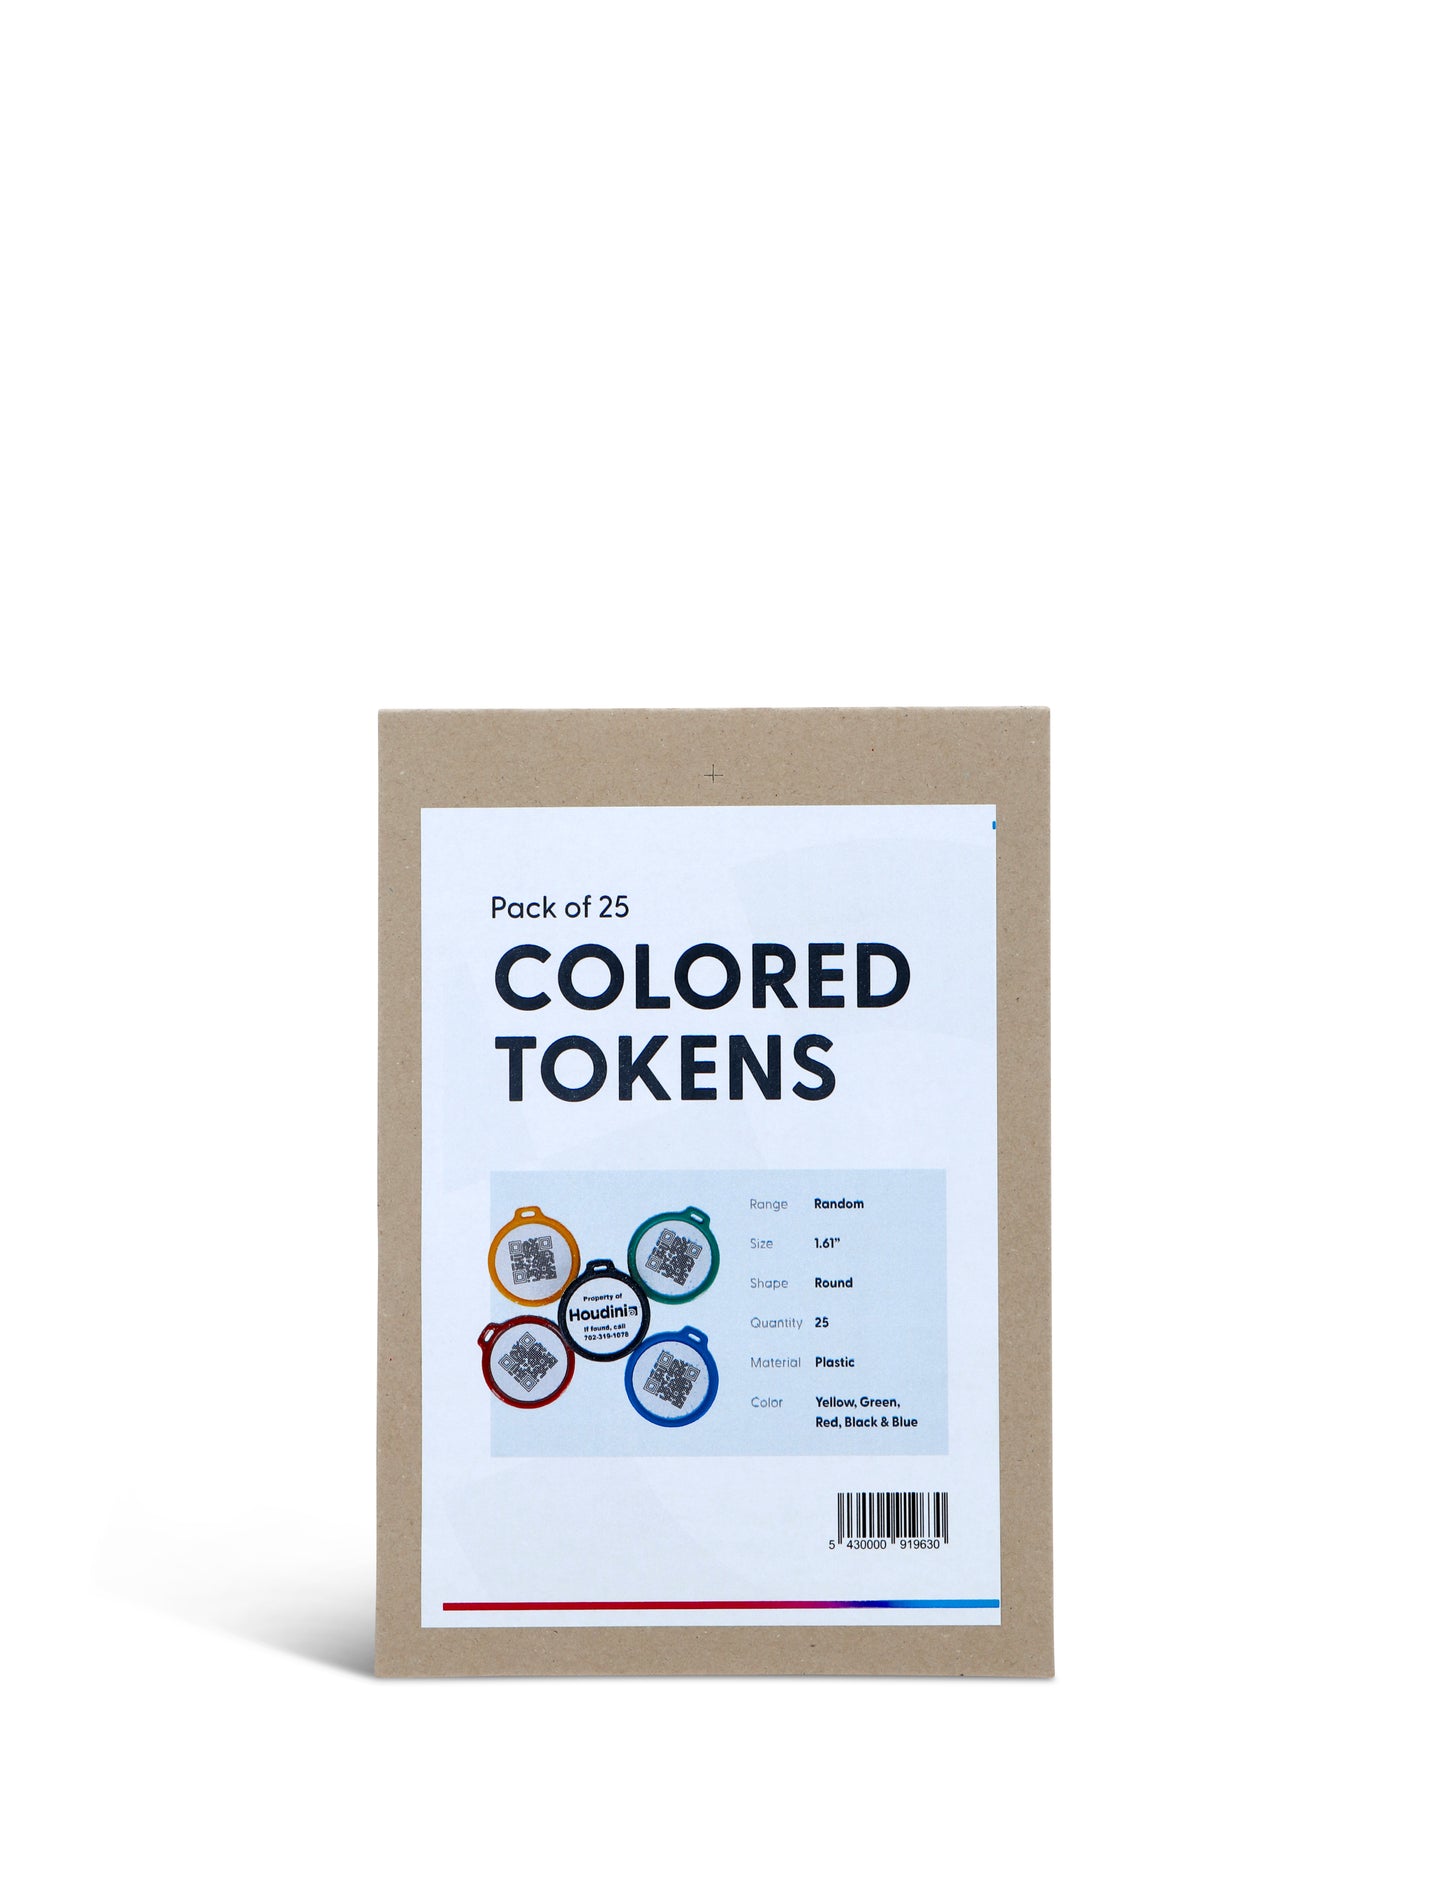 25 Colored Tokens - with key rings